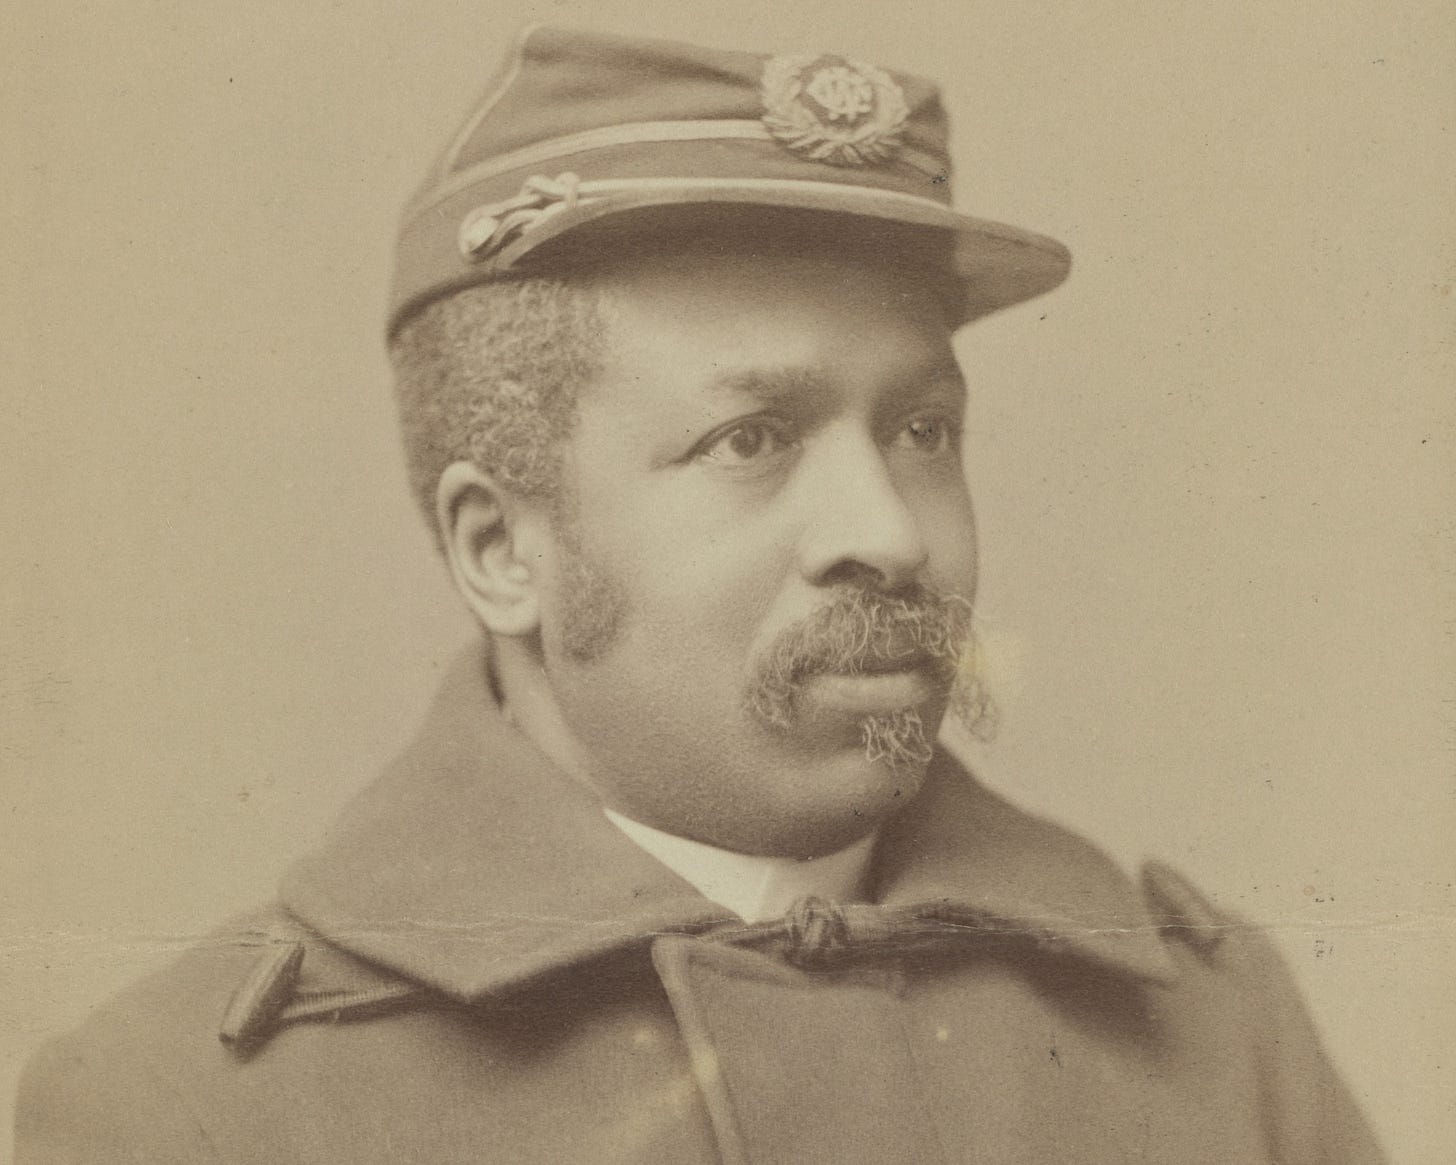 A sepia-toned portrait of Sergeant Major Christian A. Fleetwood, an African American man with a moustache who is dressed in Union Army uniform.